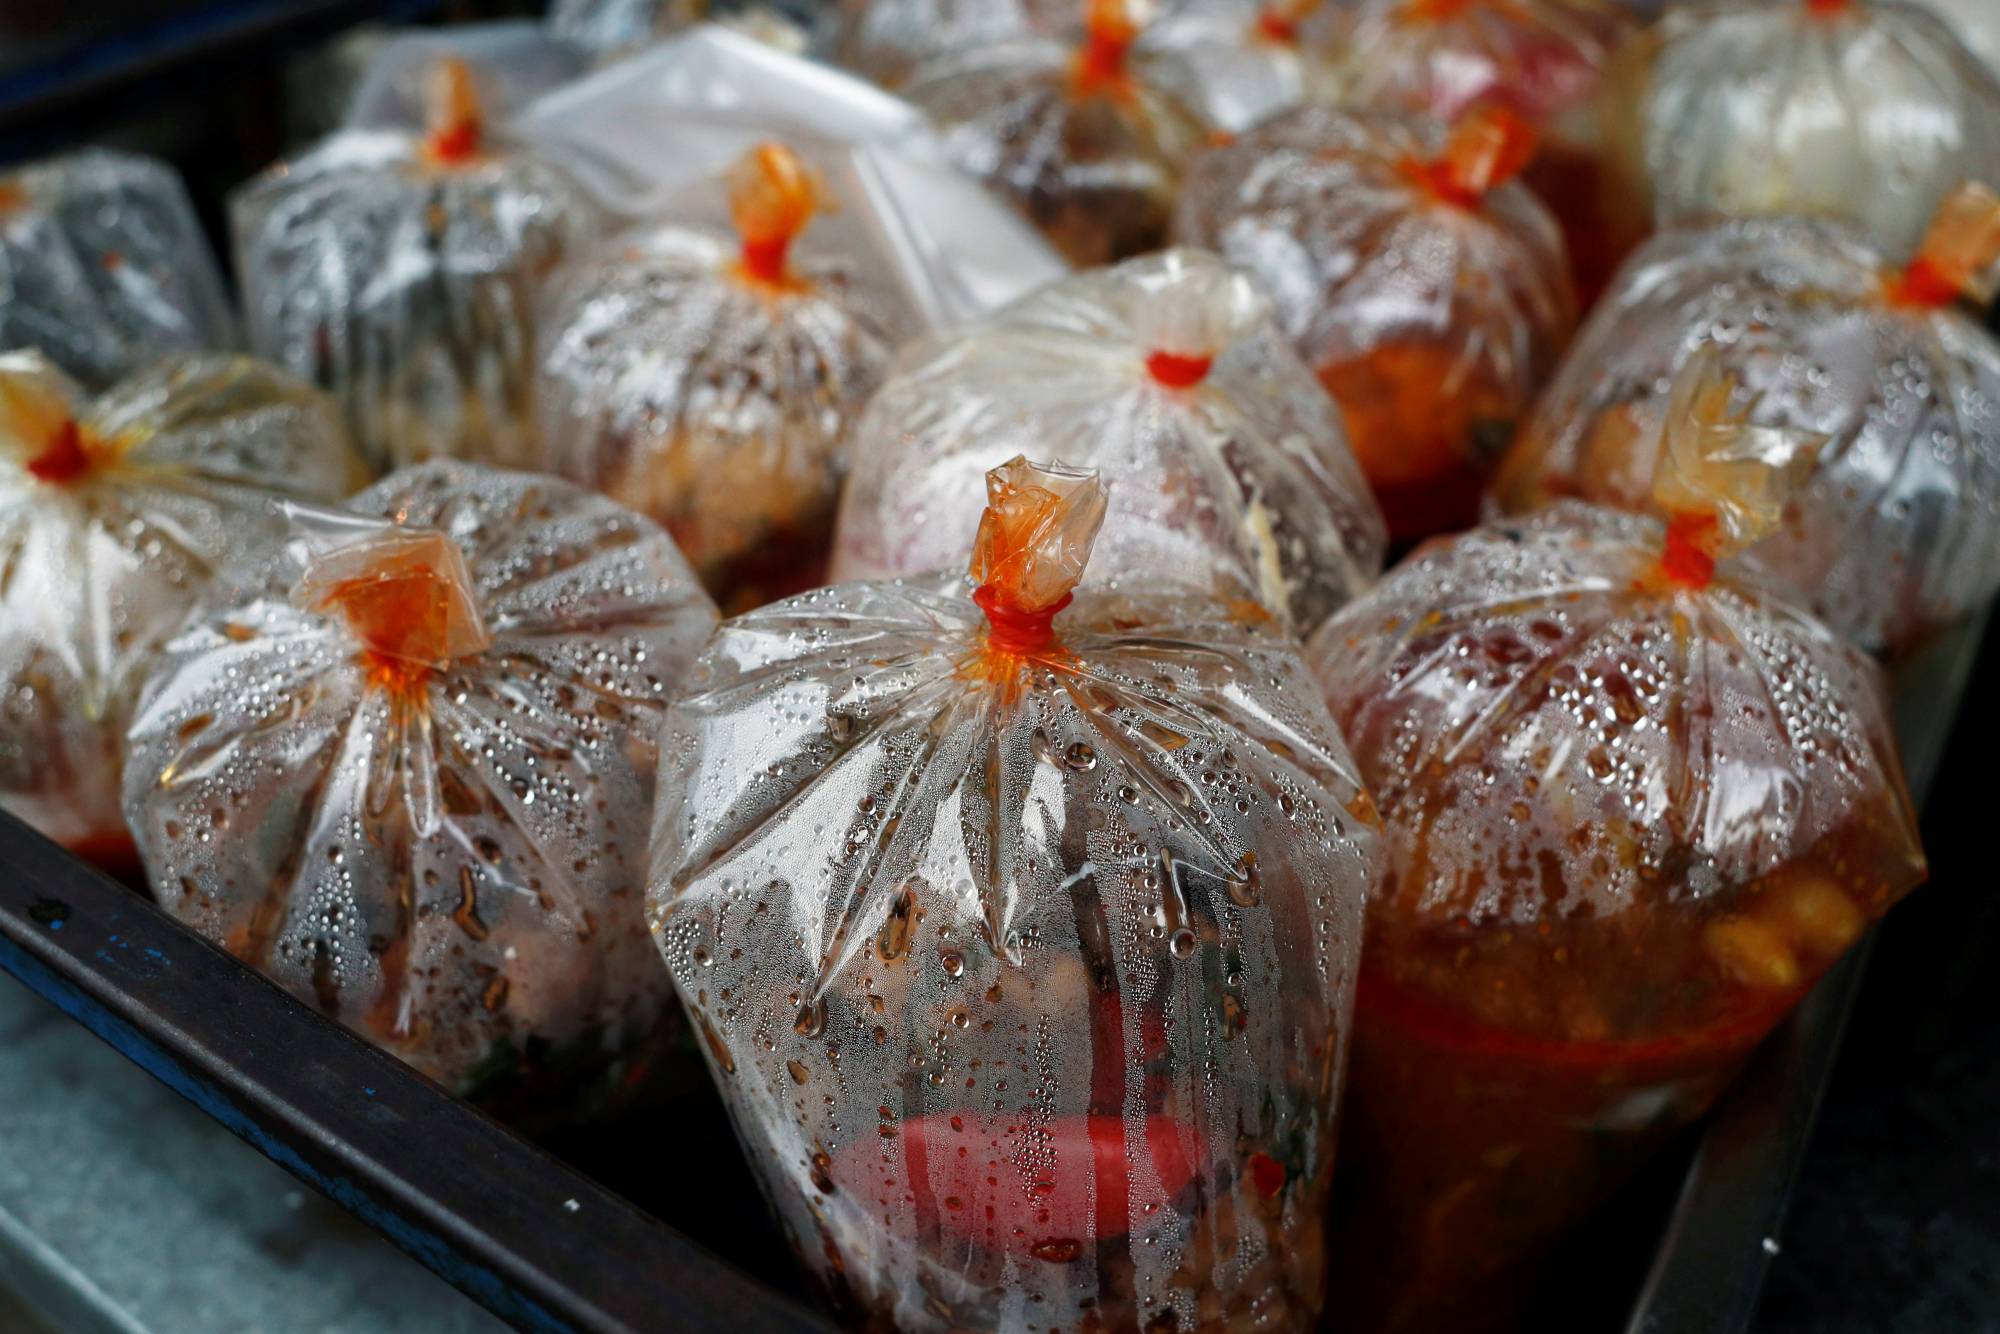 Plastic bags filled with food are displayed for sale in a market in Bangkok on Monday. Plastic waste in the Thai capital soared 62 percent in volume in April amid the coronavirus pandemic.  | REUTERS